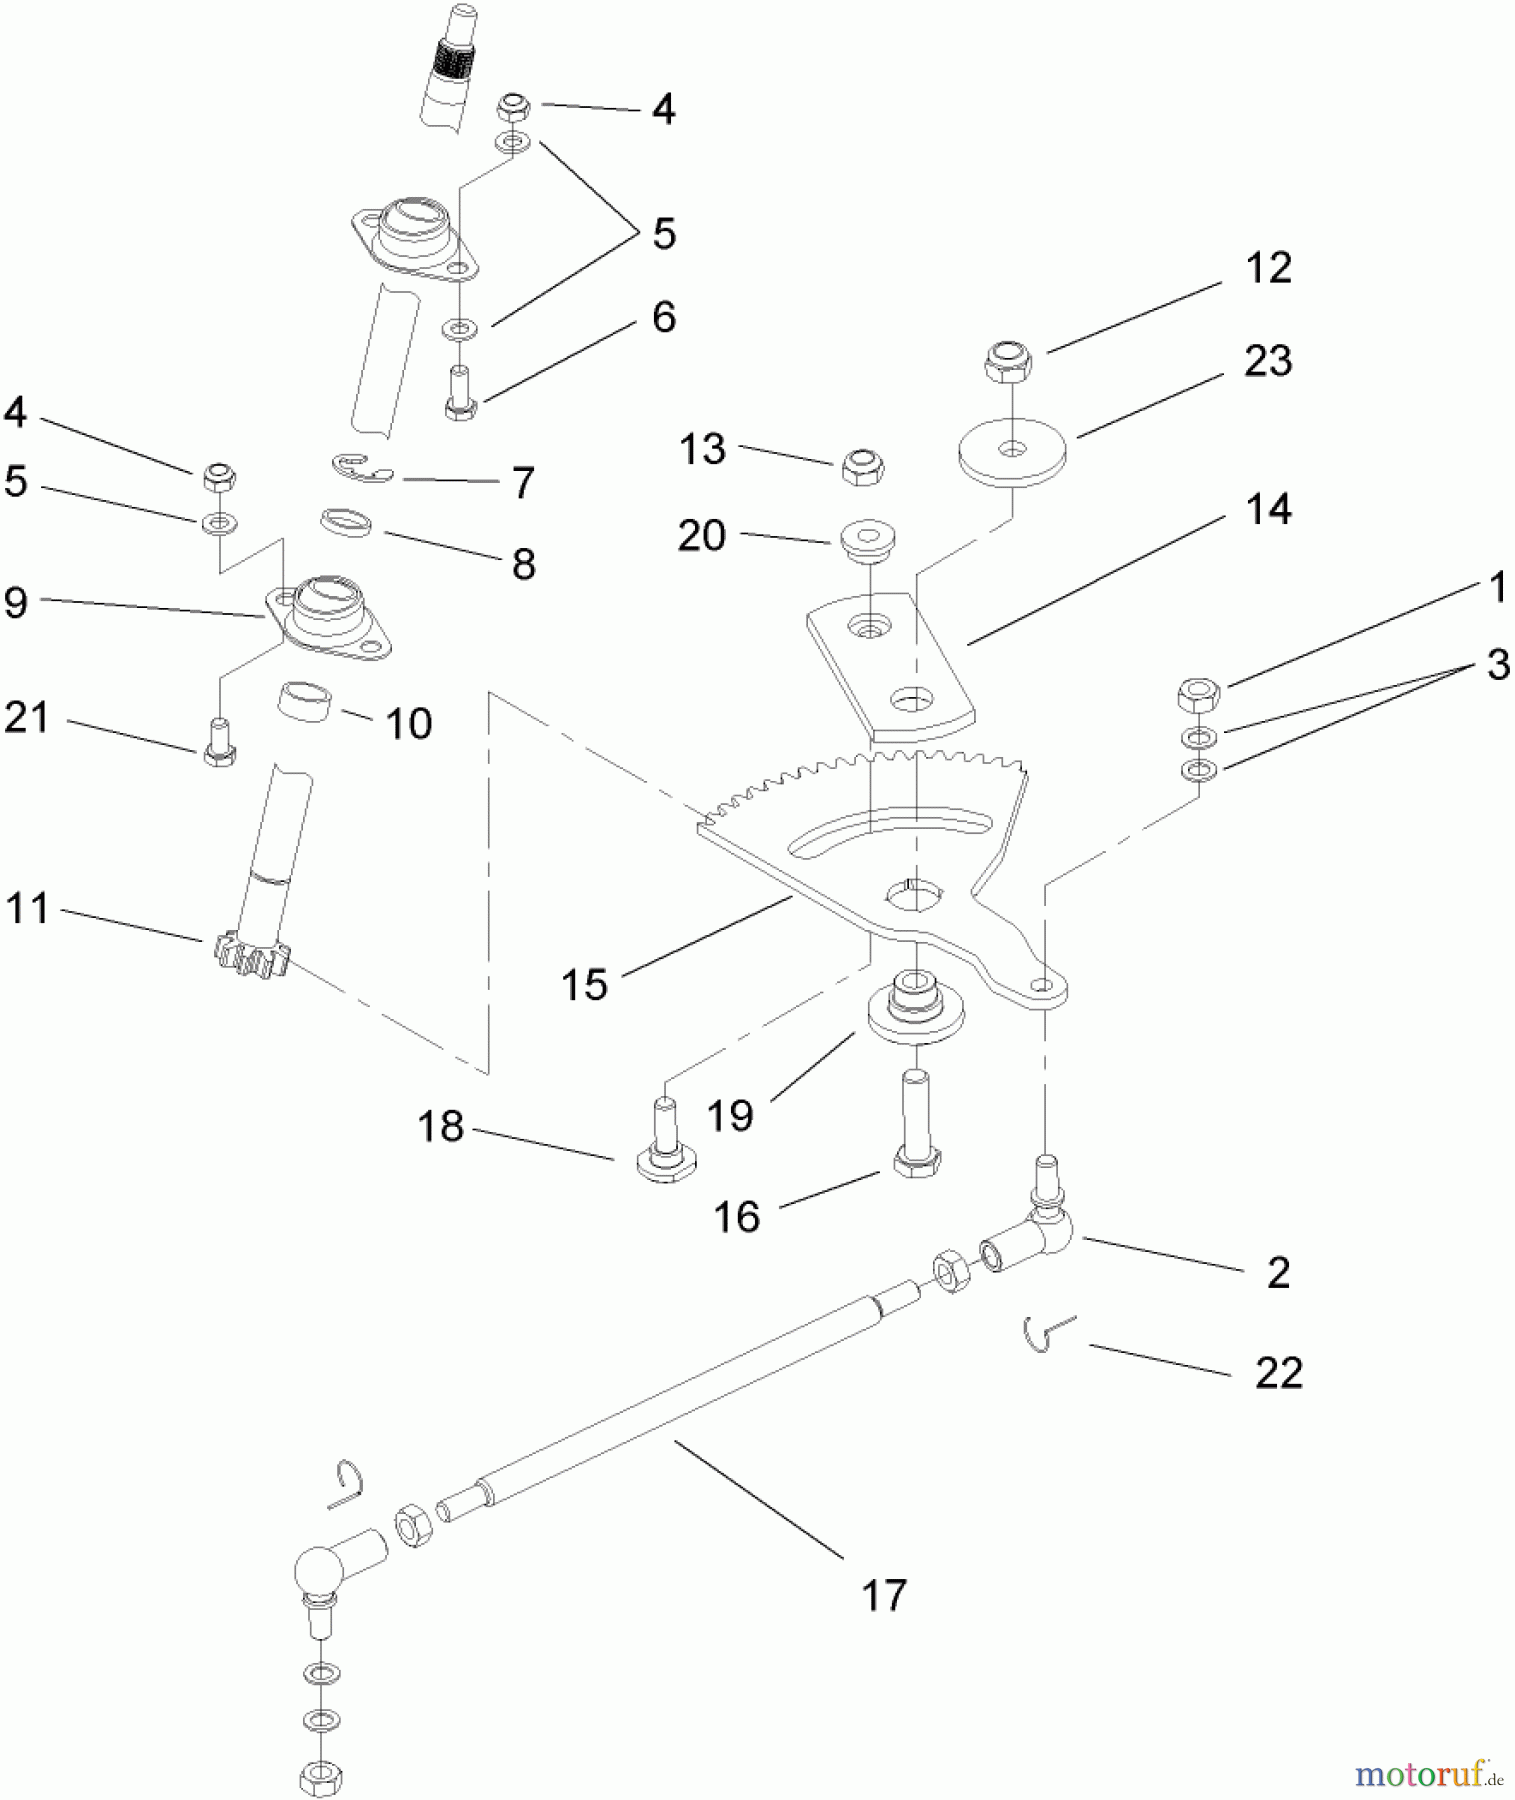  Toro Neu Mowers, Lawn & Garden Tractor Seite 1 74573 (DH 200) - Toro DH 200 Lawn Tractor, 2007 (270000001-270999999) STEERING ASSEMBLY